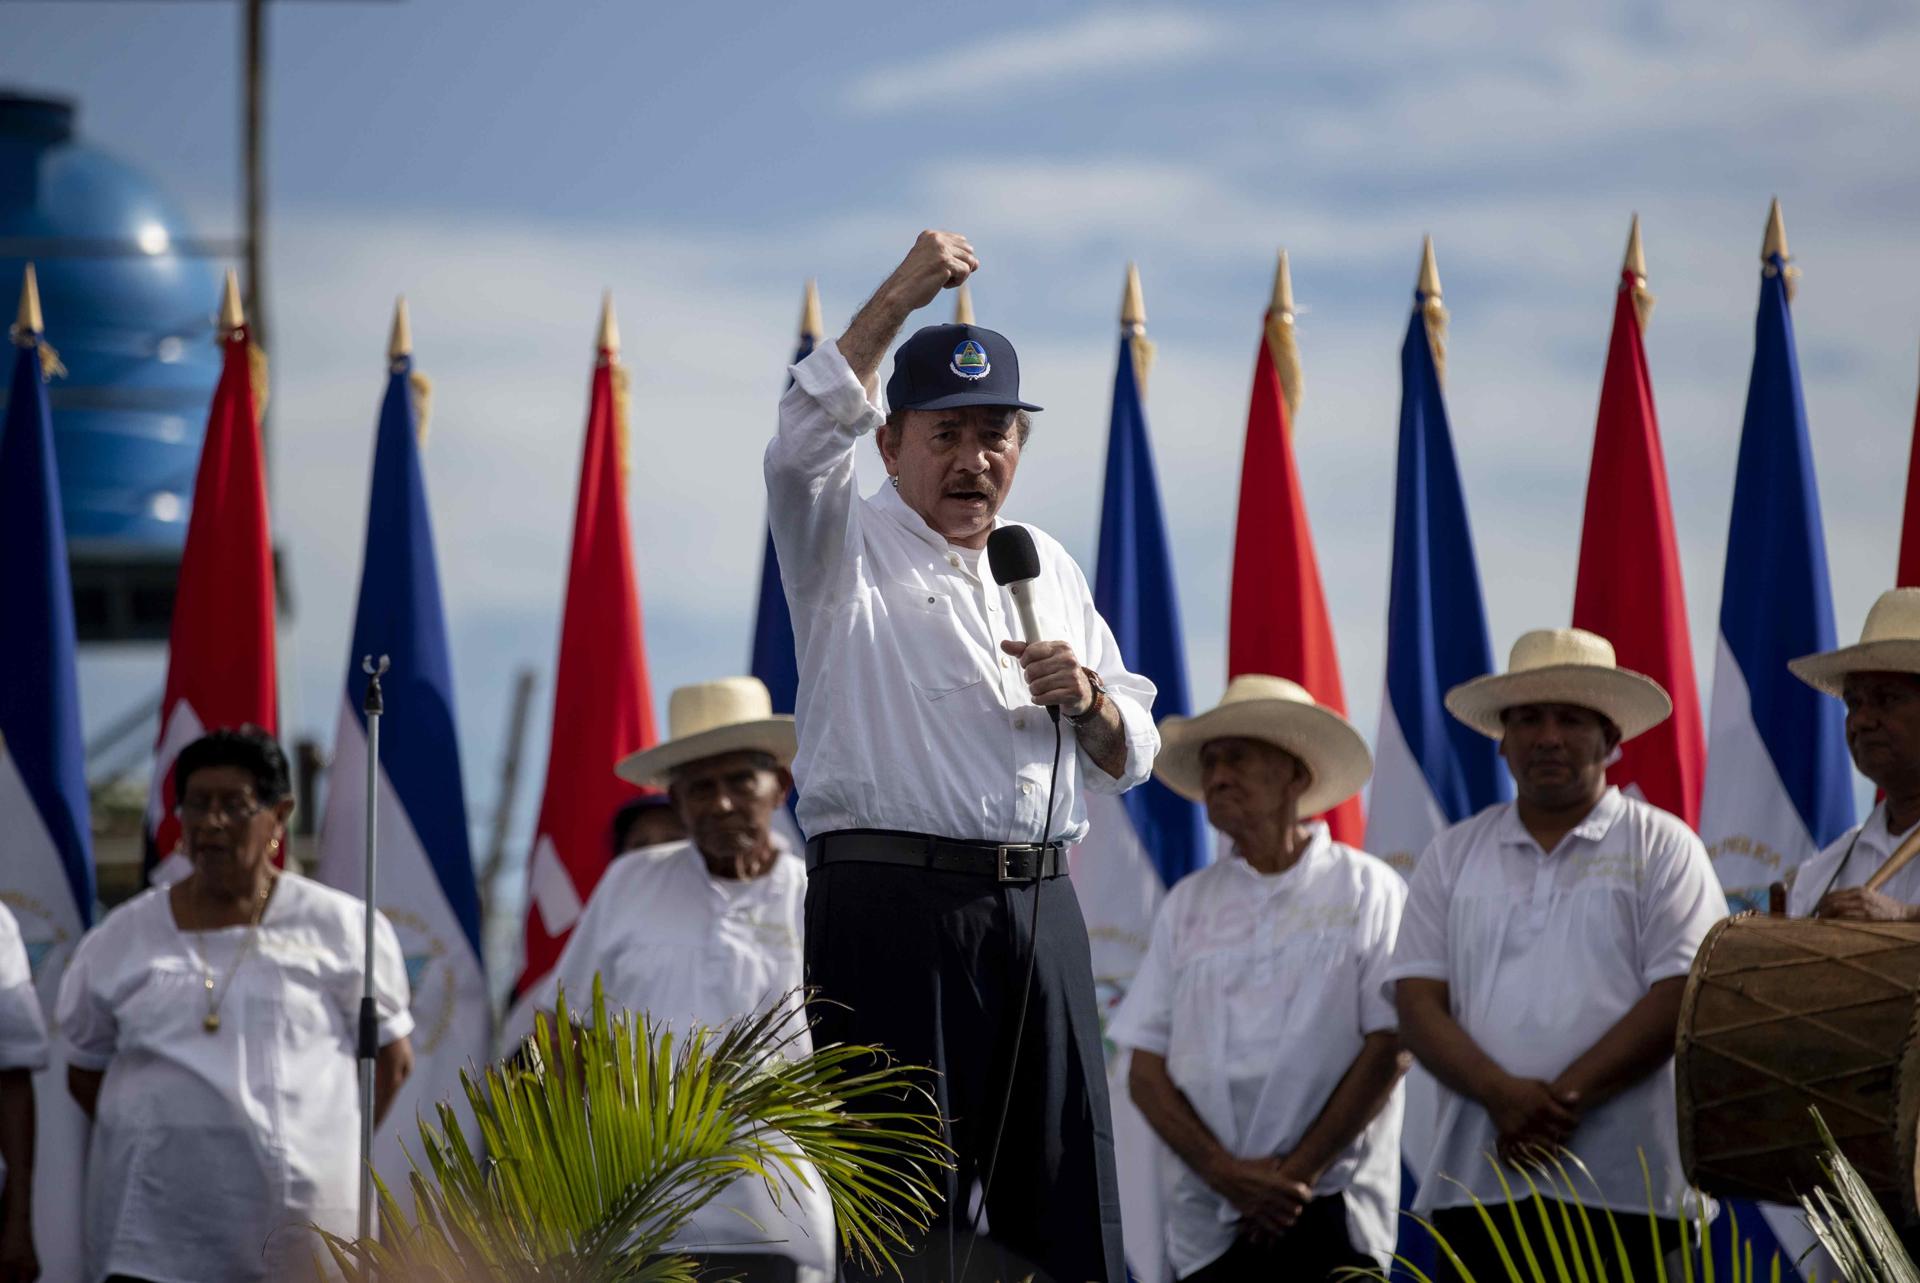 Ortega reveals that he has never had respect for the bishops of Nicaragua